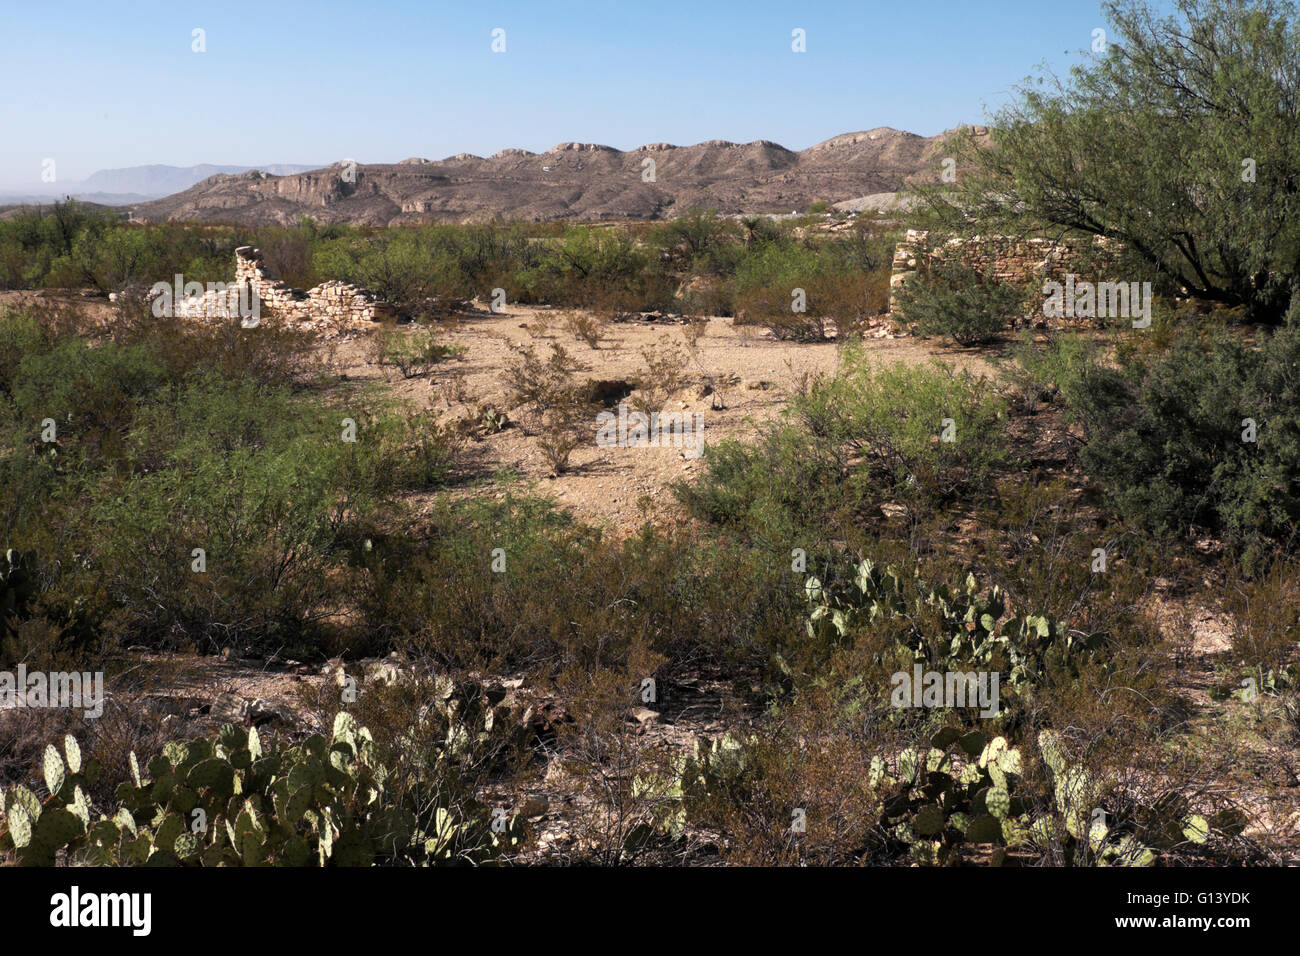 Terlingua ghost town, Texas. Plants in the foreground include Mesquite, creosote and Prickly Pear cactus. Stock Photo